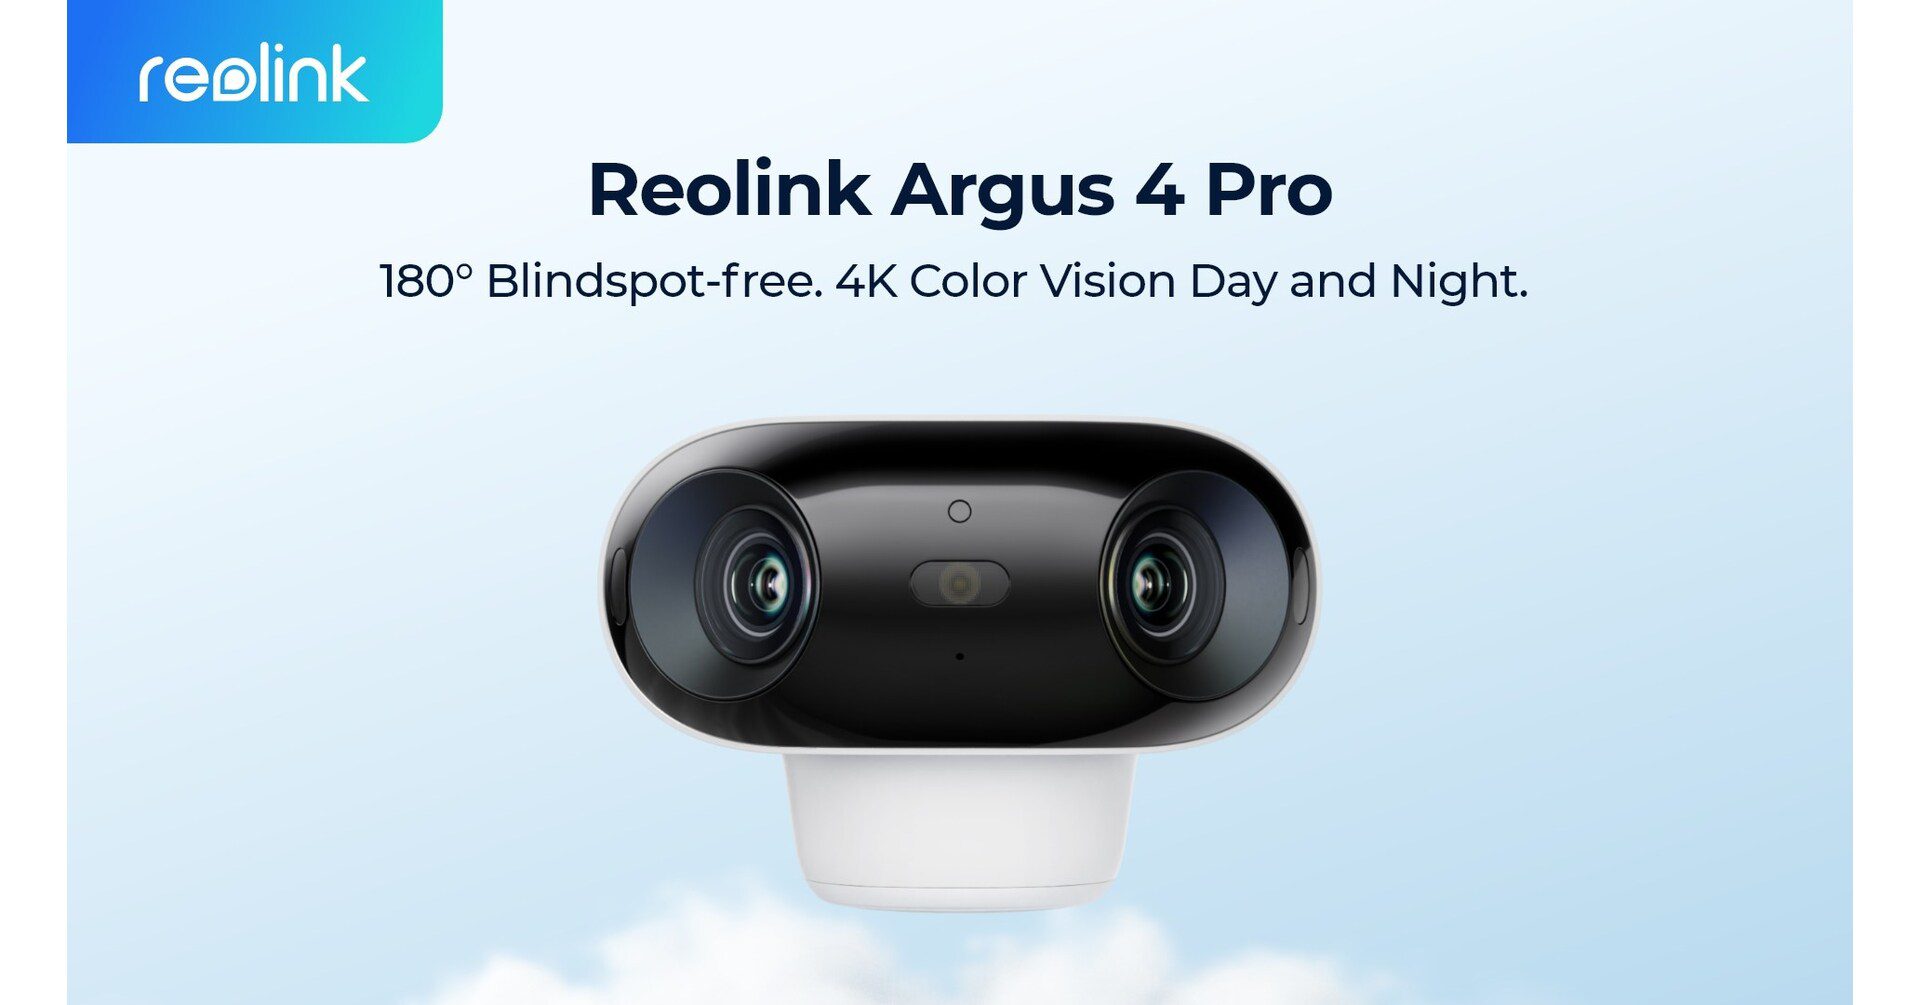 Reolink Announces Argus 4 Pro The World’s 1st Day & Night Color Vision Home Security Camera